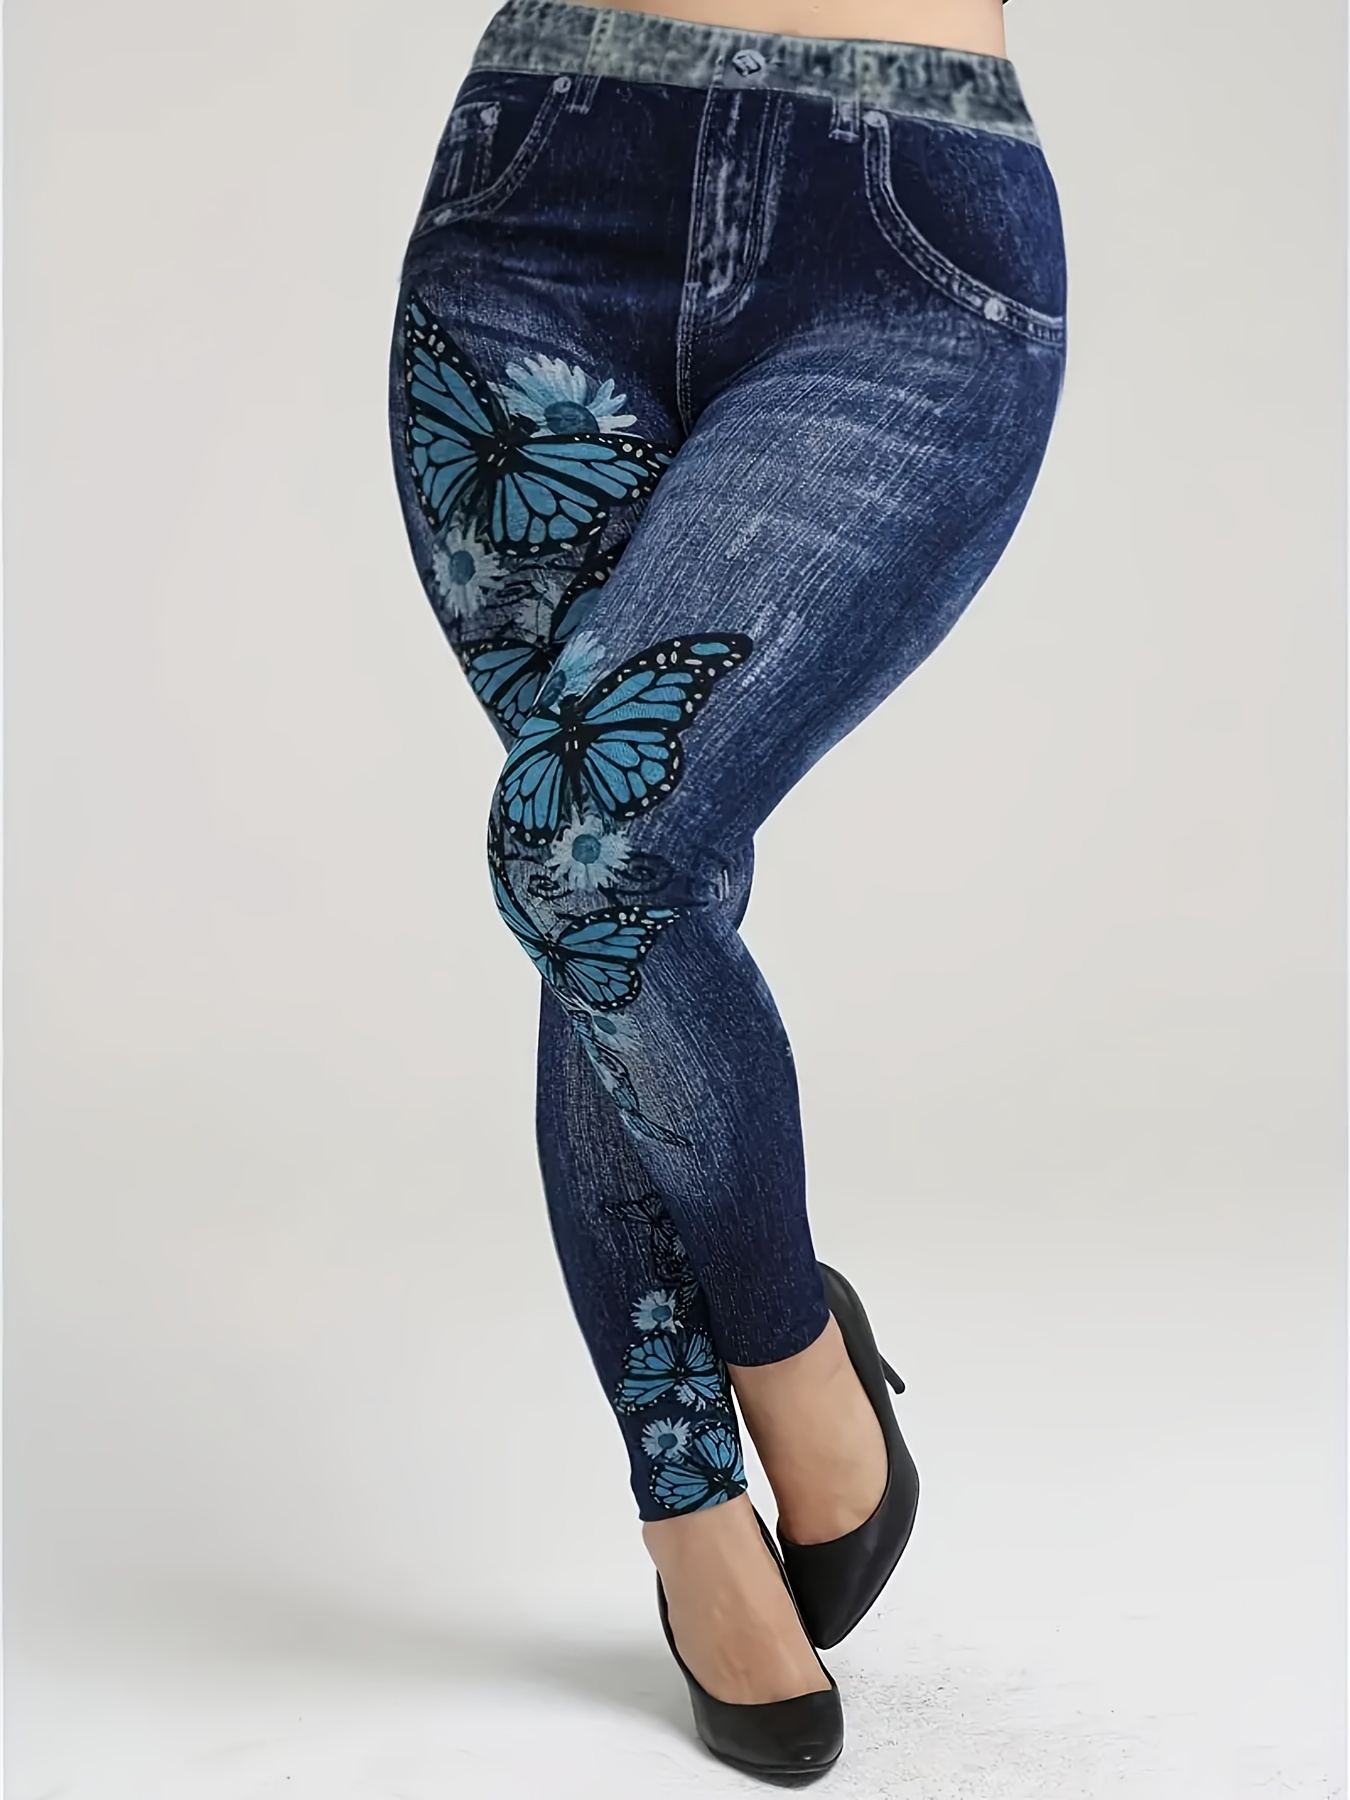 Frontwalk Jean Leggings for Women Plus Size Butterfly Printed Fake Denim  High Waisted Yoga Pants Stretch Faux Jean Look Jeggings Tights Flroal Blue